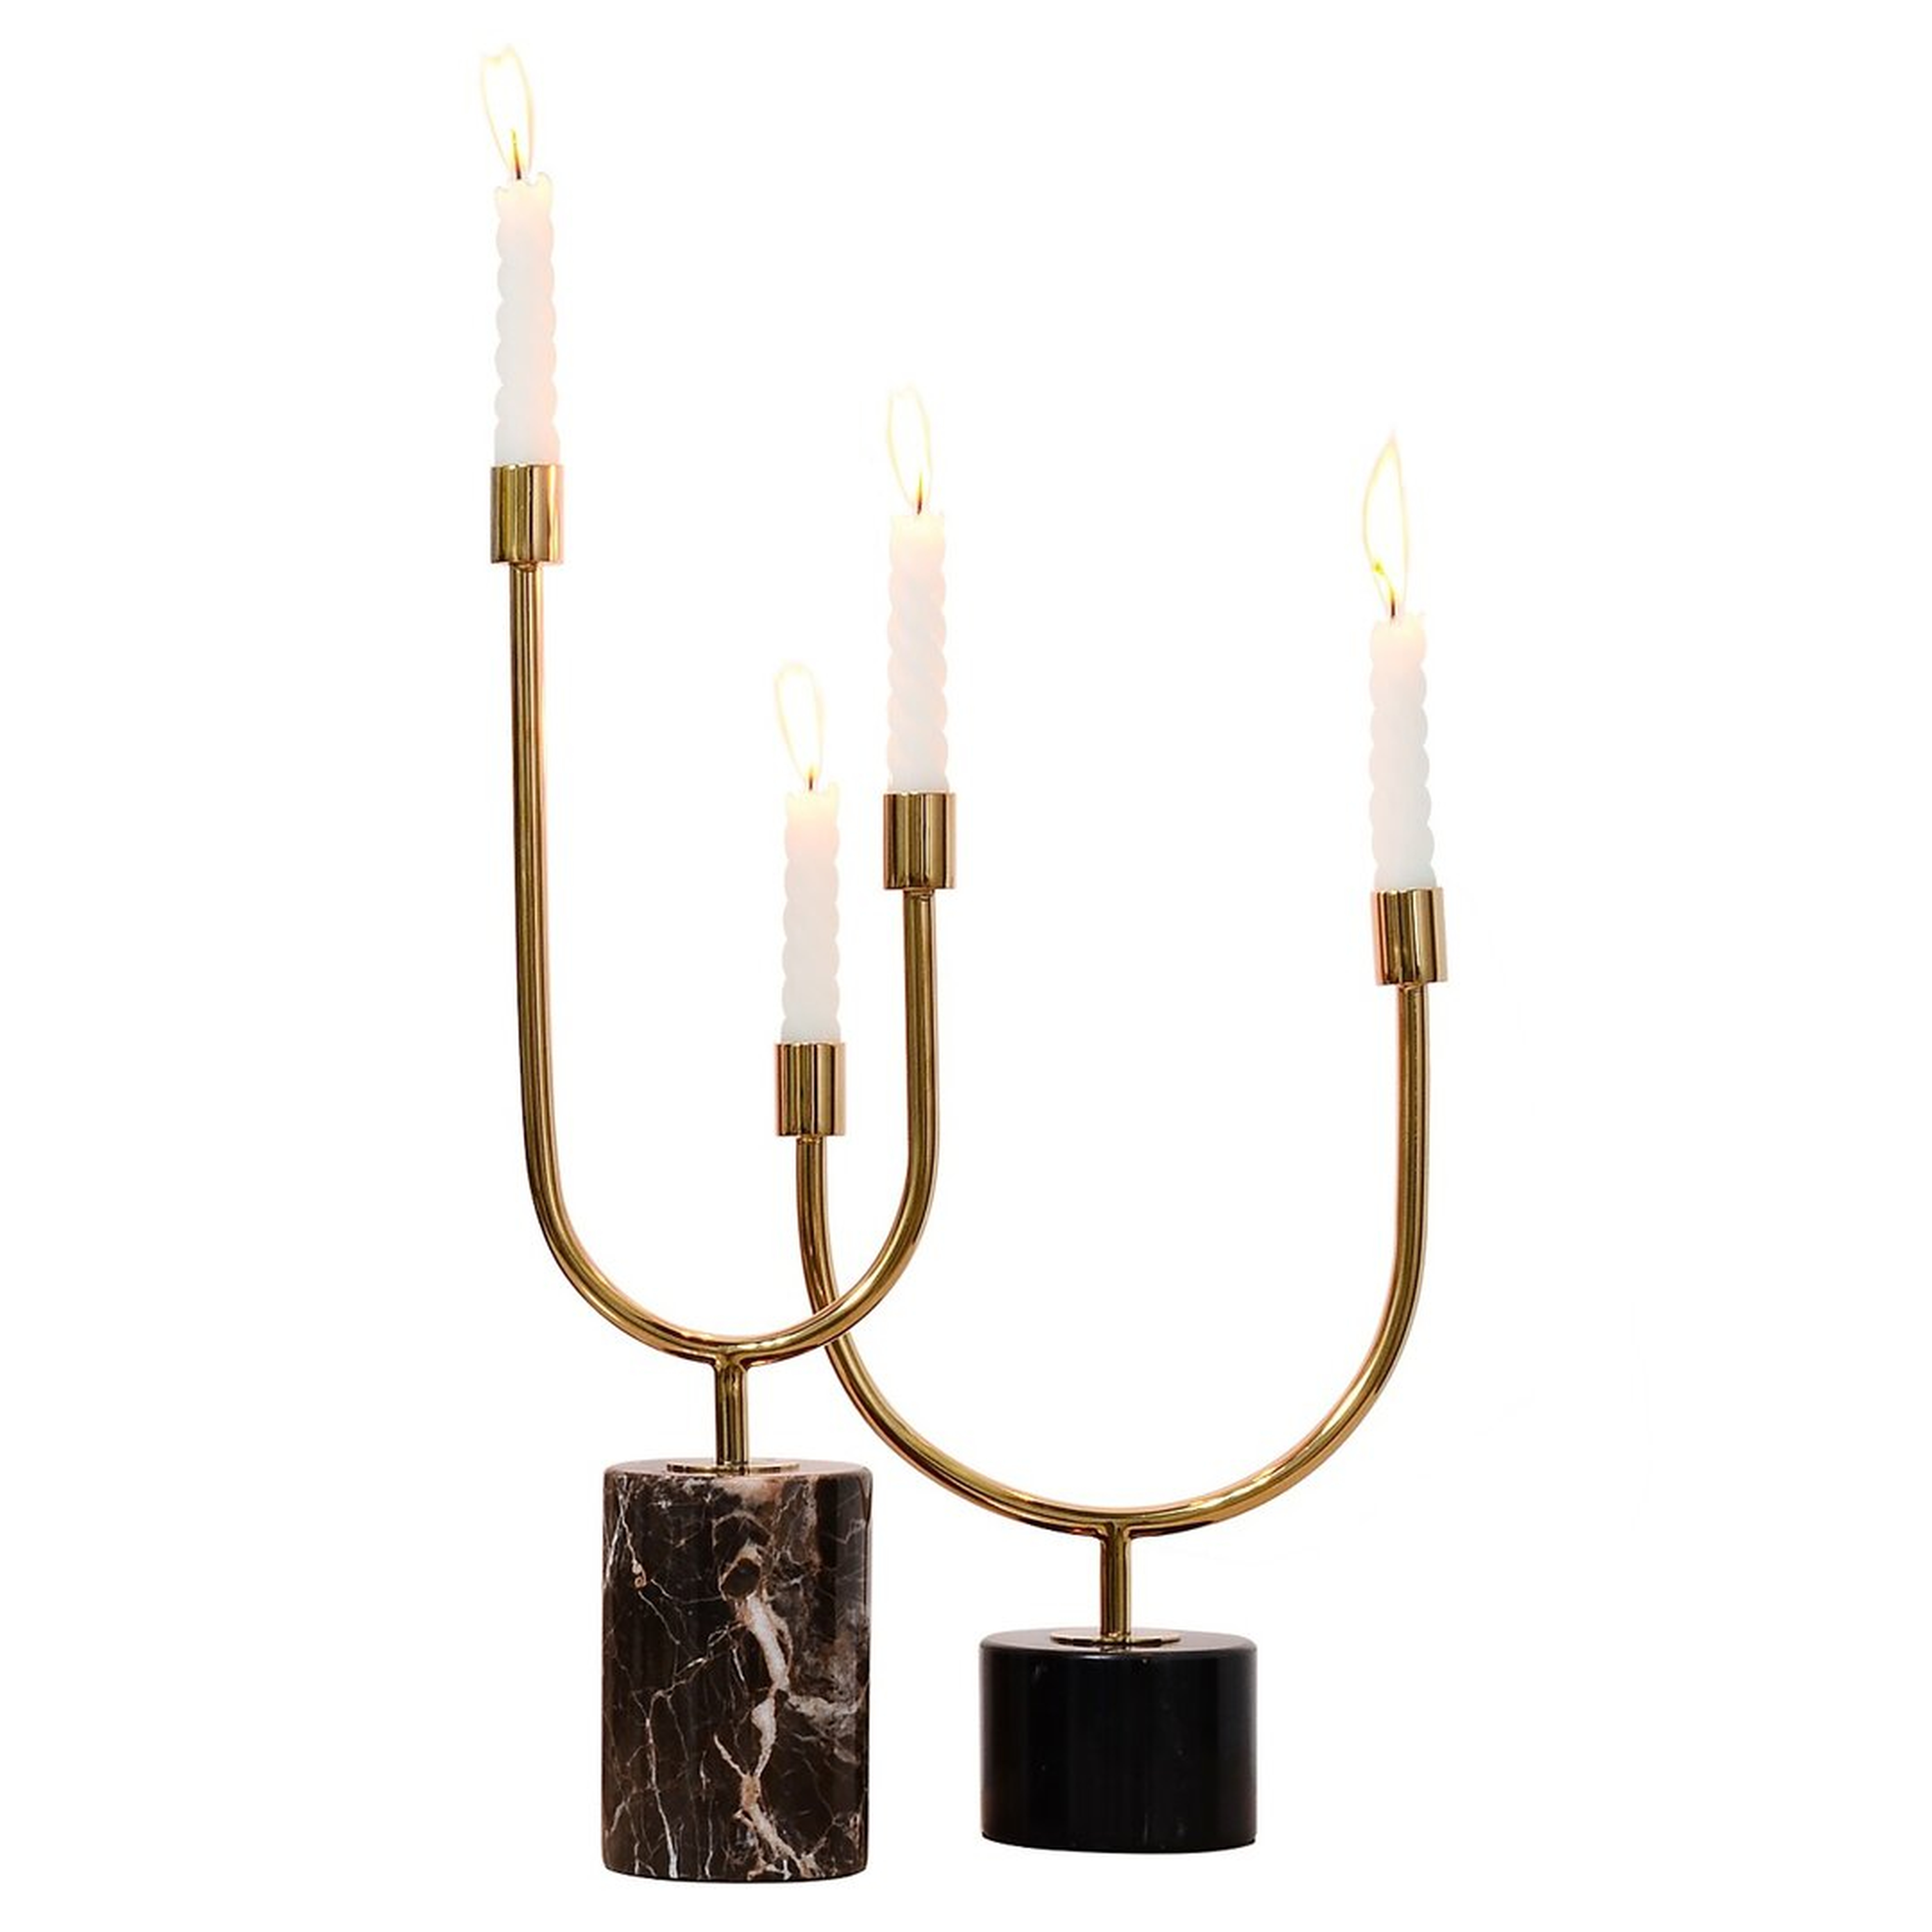 "ellahome 16.53"" Tabletop Candlestick" (includes one) - Perigold